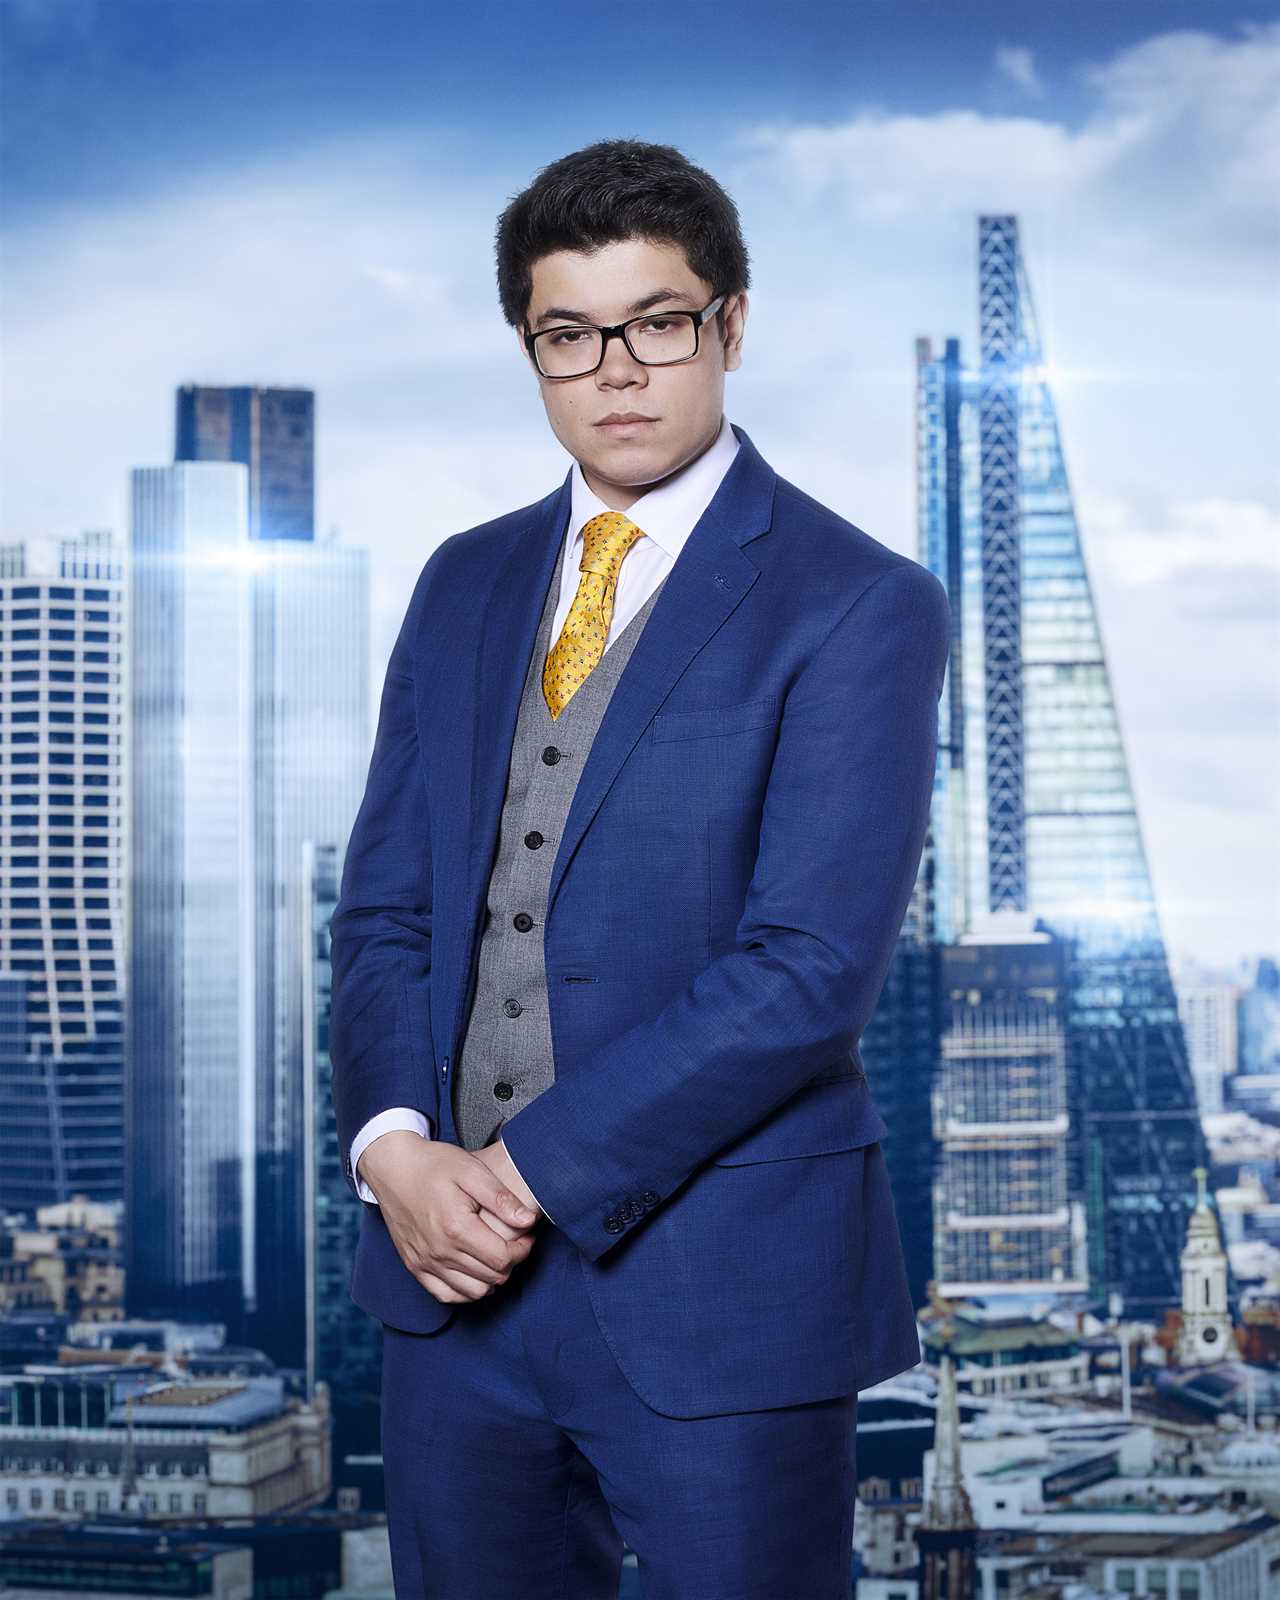 Who is Gregory Ebbs on The Apprentice?